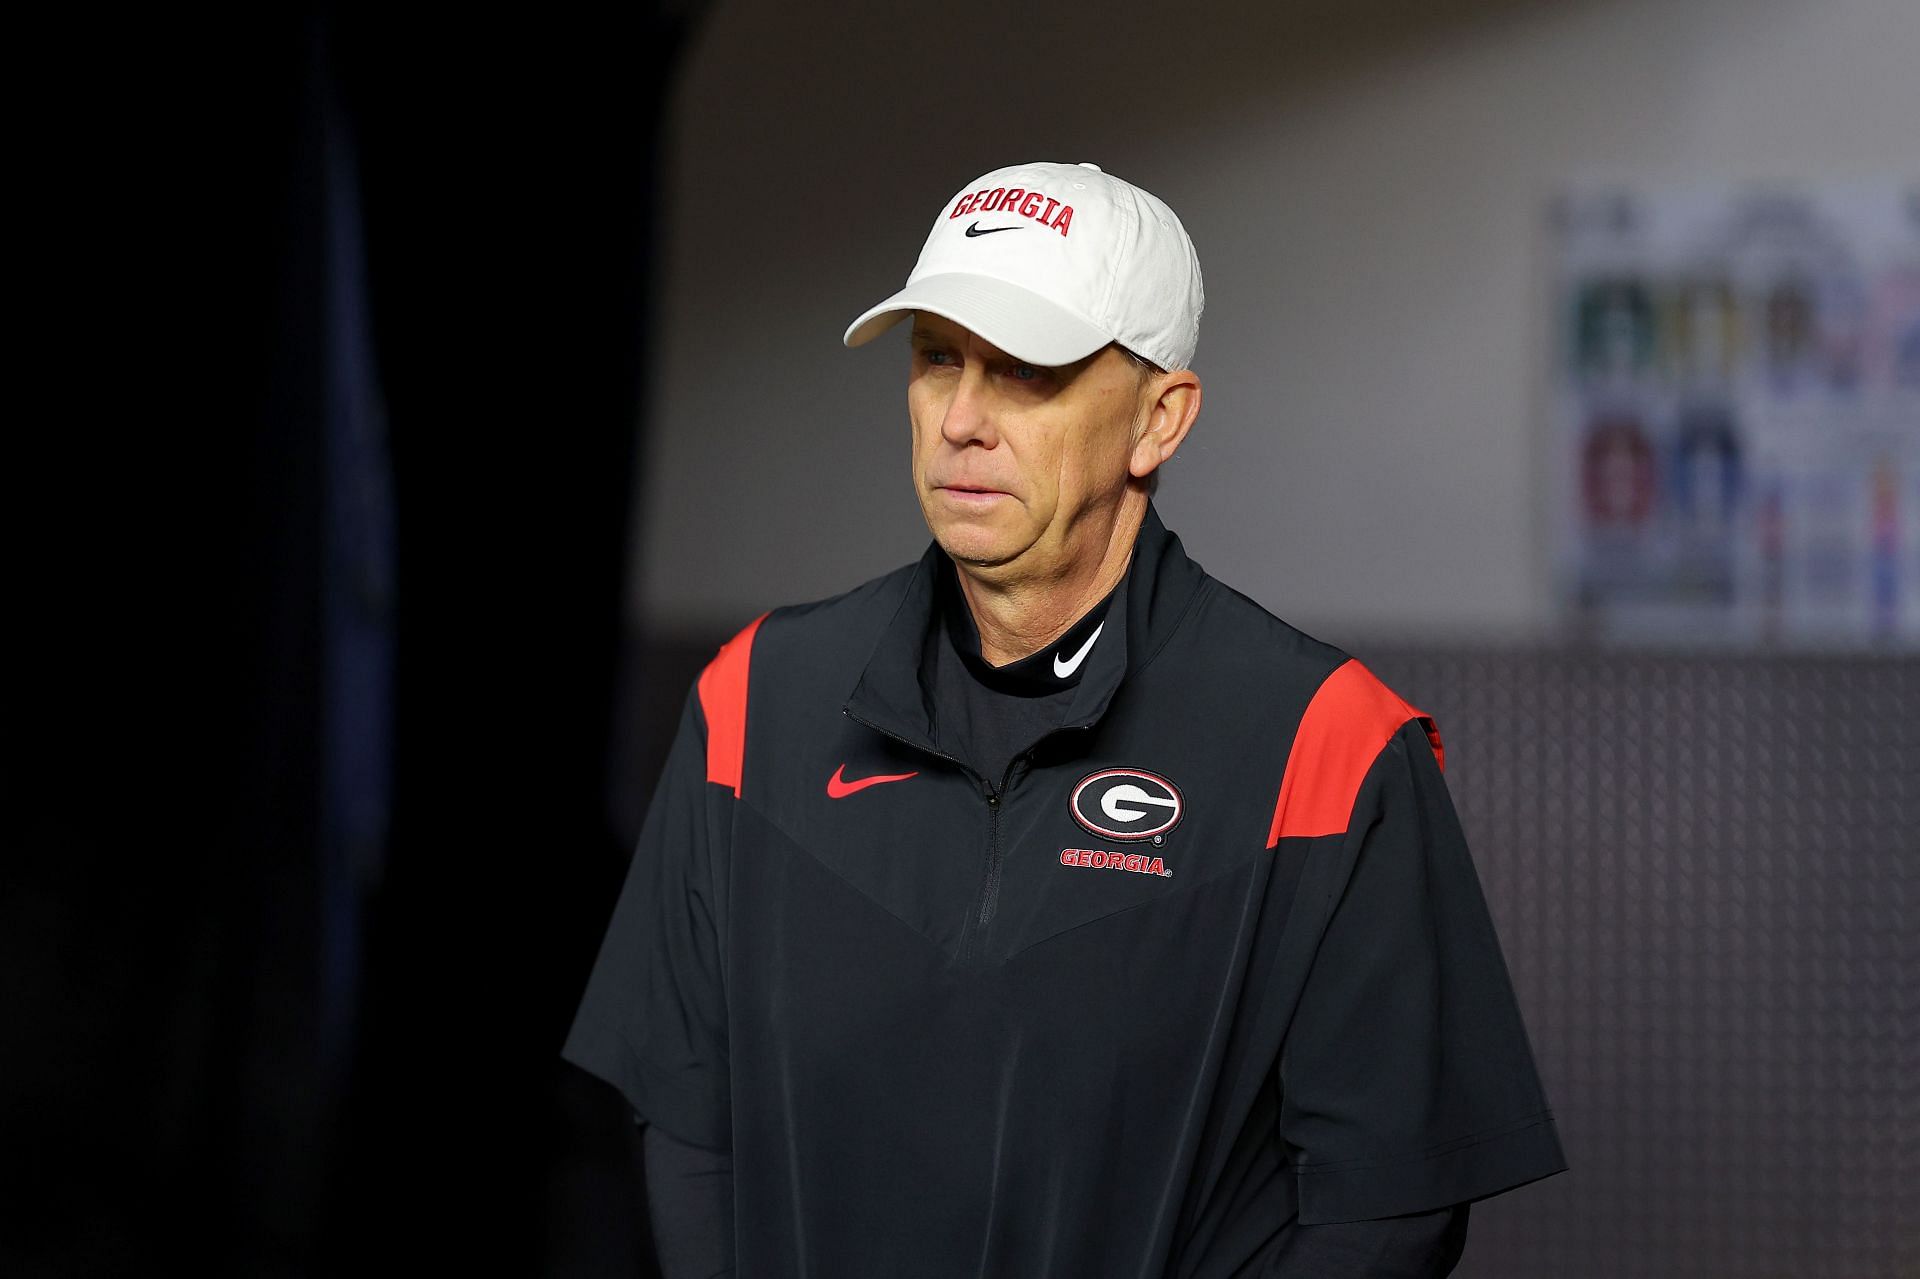 Georgia Bulldogs offensive coordinator Todd Monken looks on before the College Football Playoff National Championship game against the TCU Horned Frogs at SoFi Stadium on January 09, 2023, in Inglewood, California.